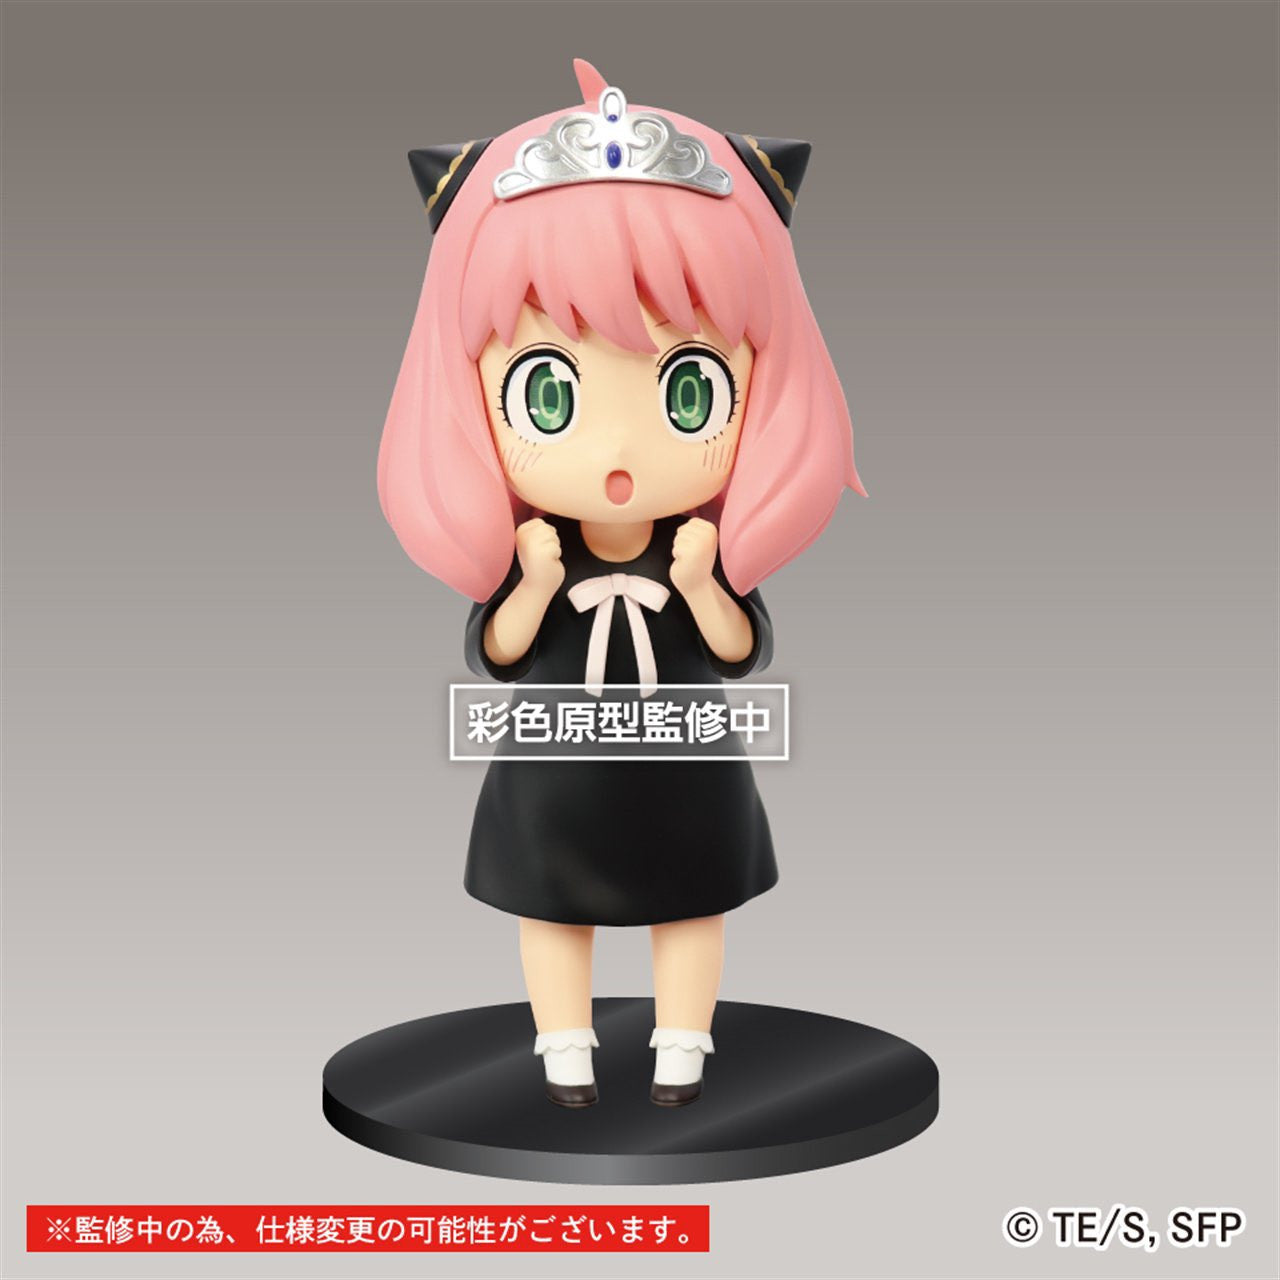 Spy x Family - Puchieete - Anya Forger Princess Ver. Figure 13cm